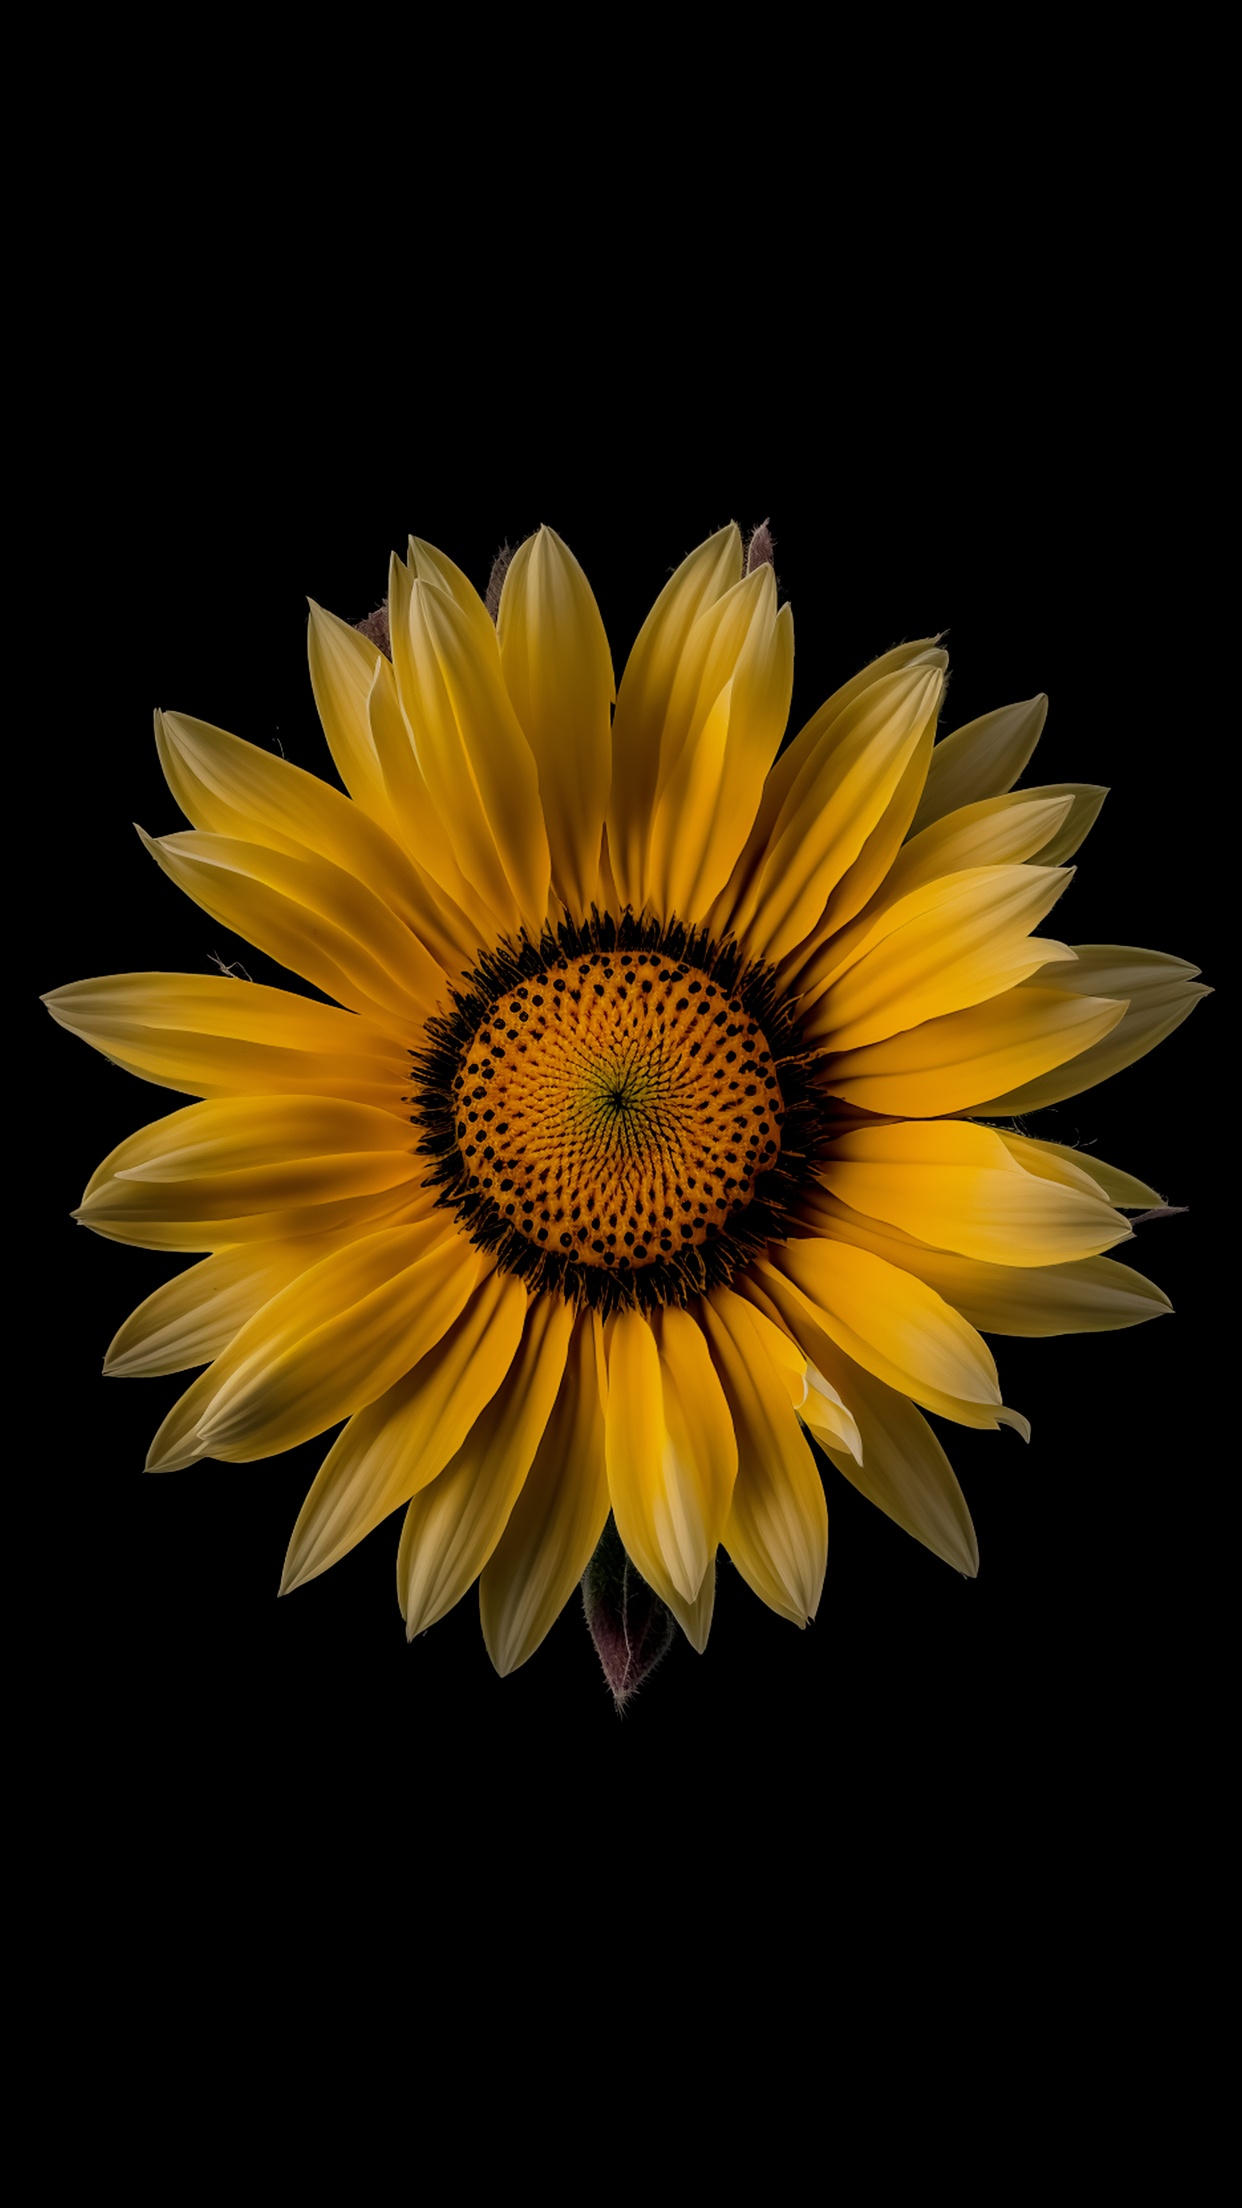 100+ Sunflower wallpapers HD | Download Free backgrounds